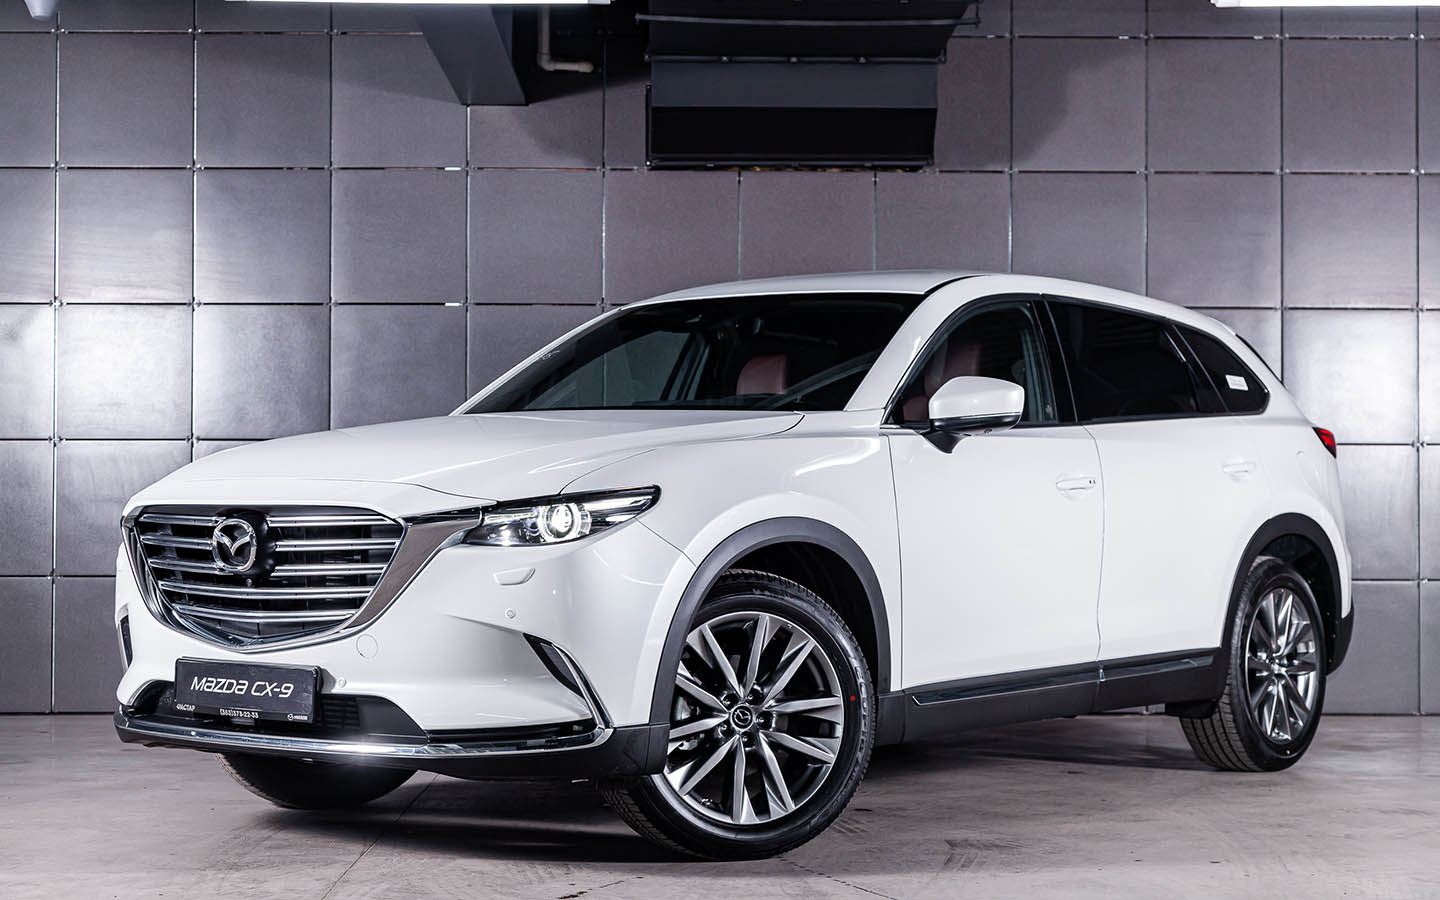 Mazda CX-9 ranks third among the popular used Mazda cars in the UAE